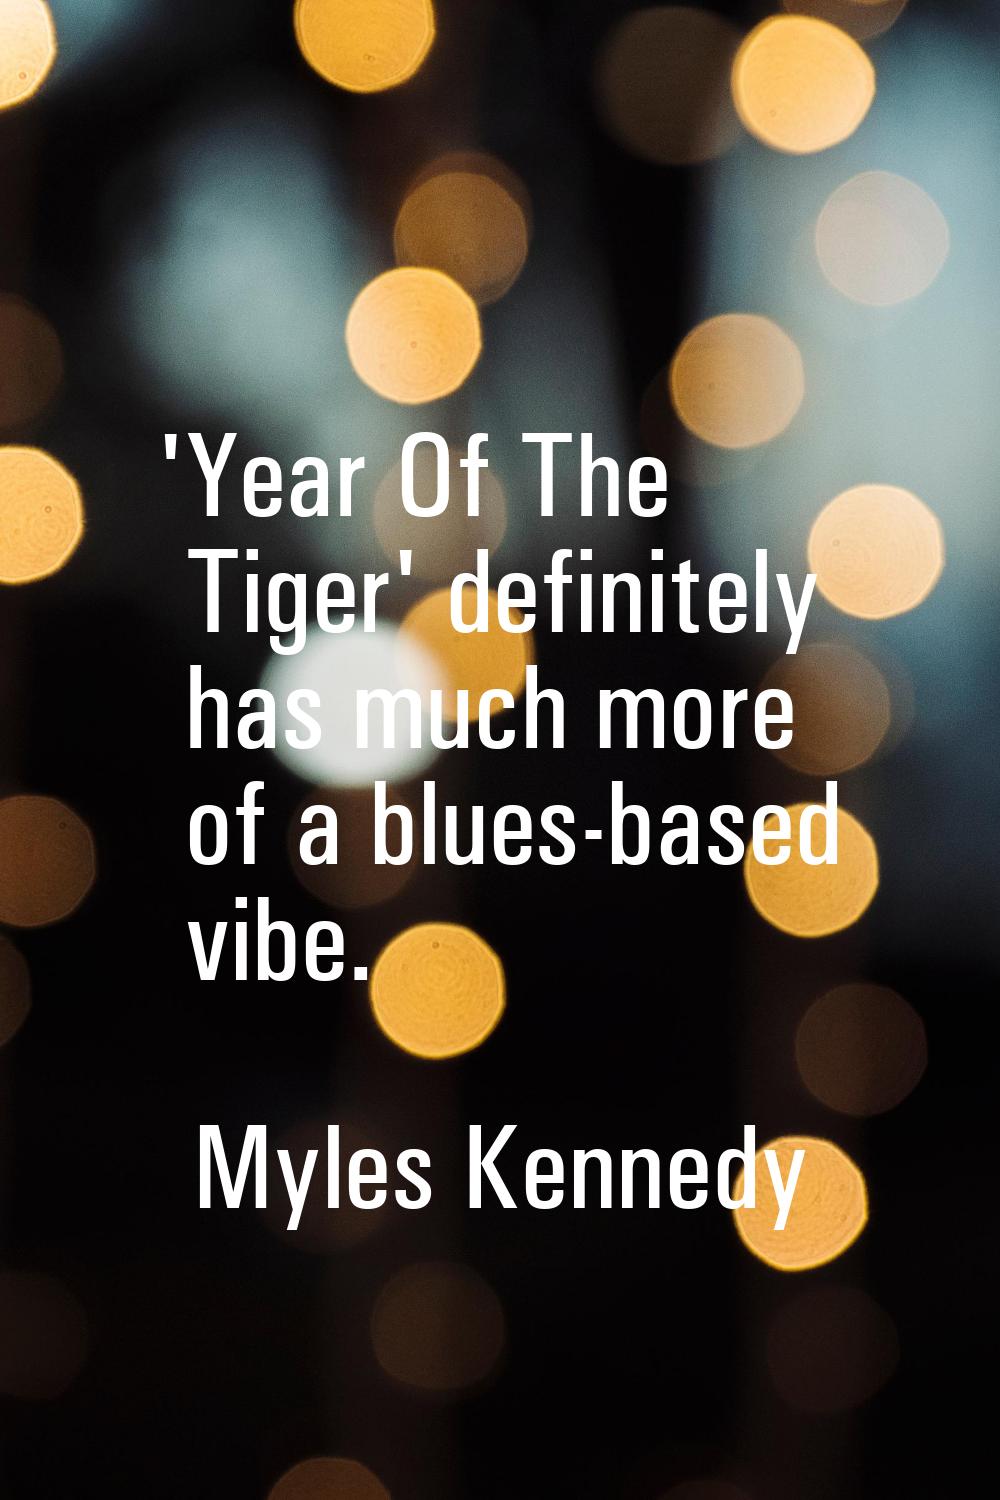 'Year Of The Tiger' definitely has much more of a blues-based vibe.